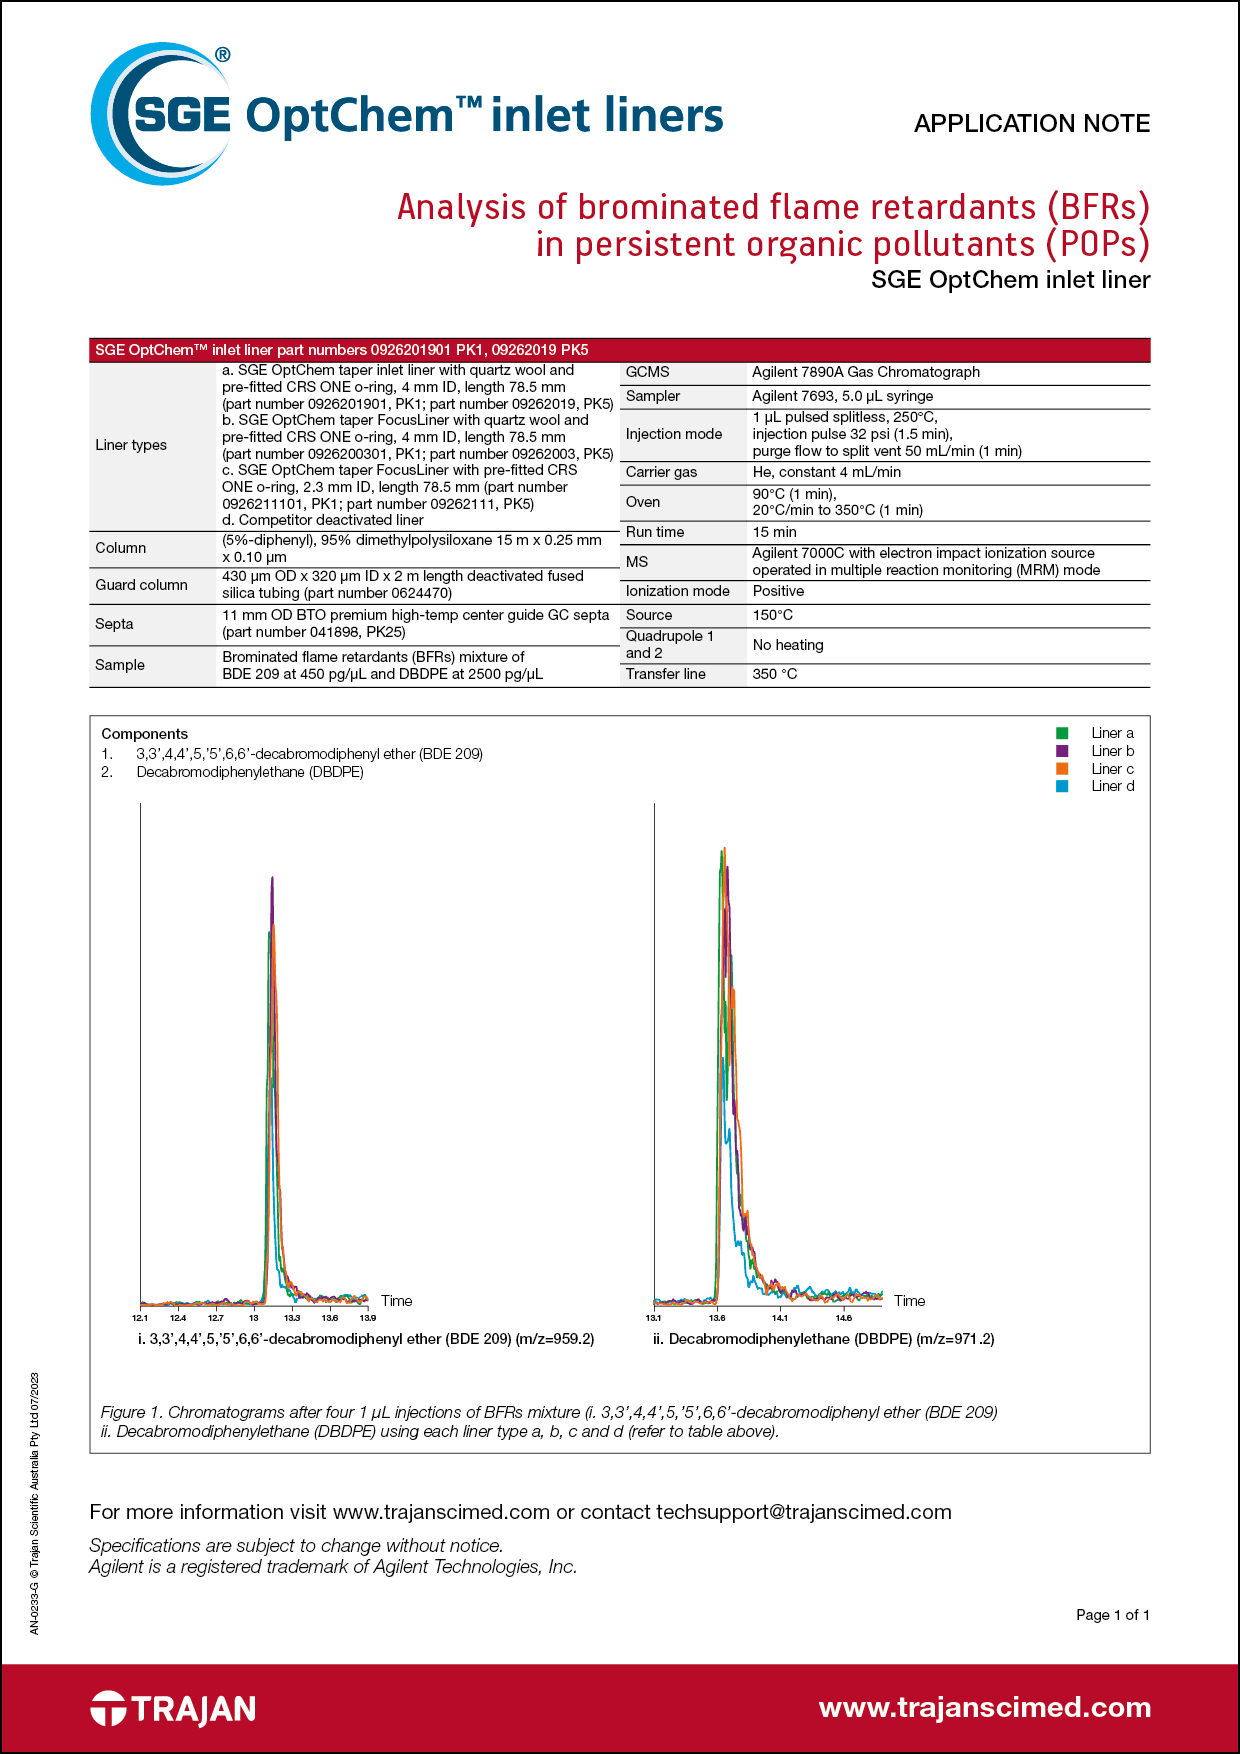 Application Note - Analysis of brominated flame retardants (BFRs)  in persistent organic pollutants (POPs)